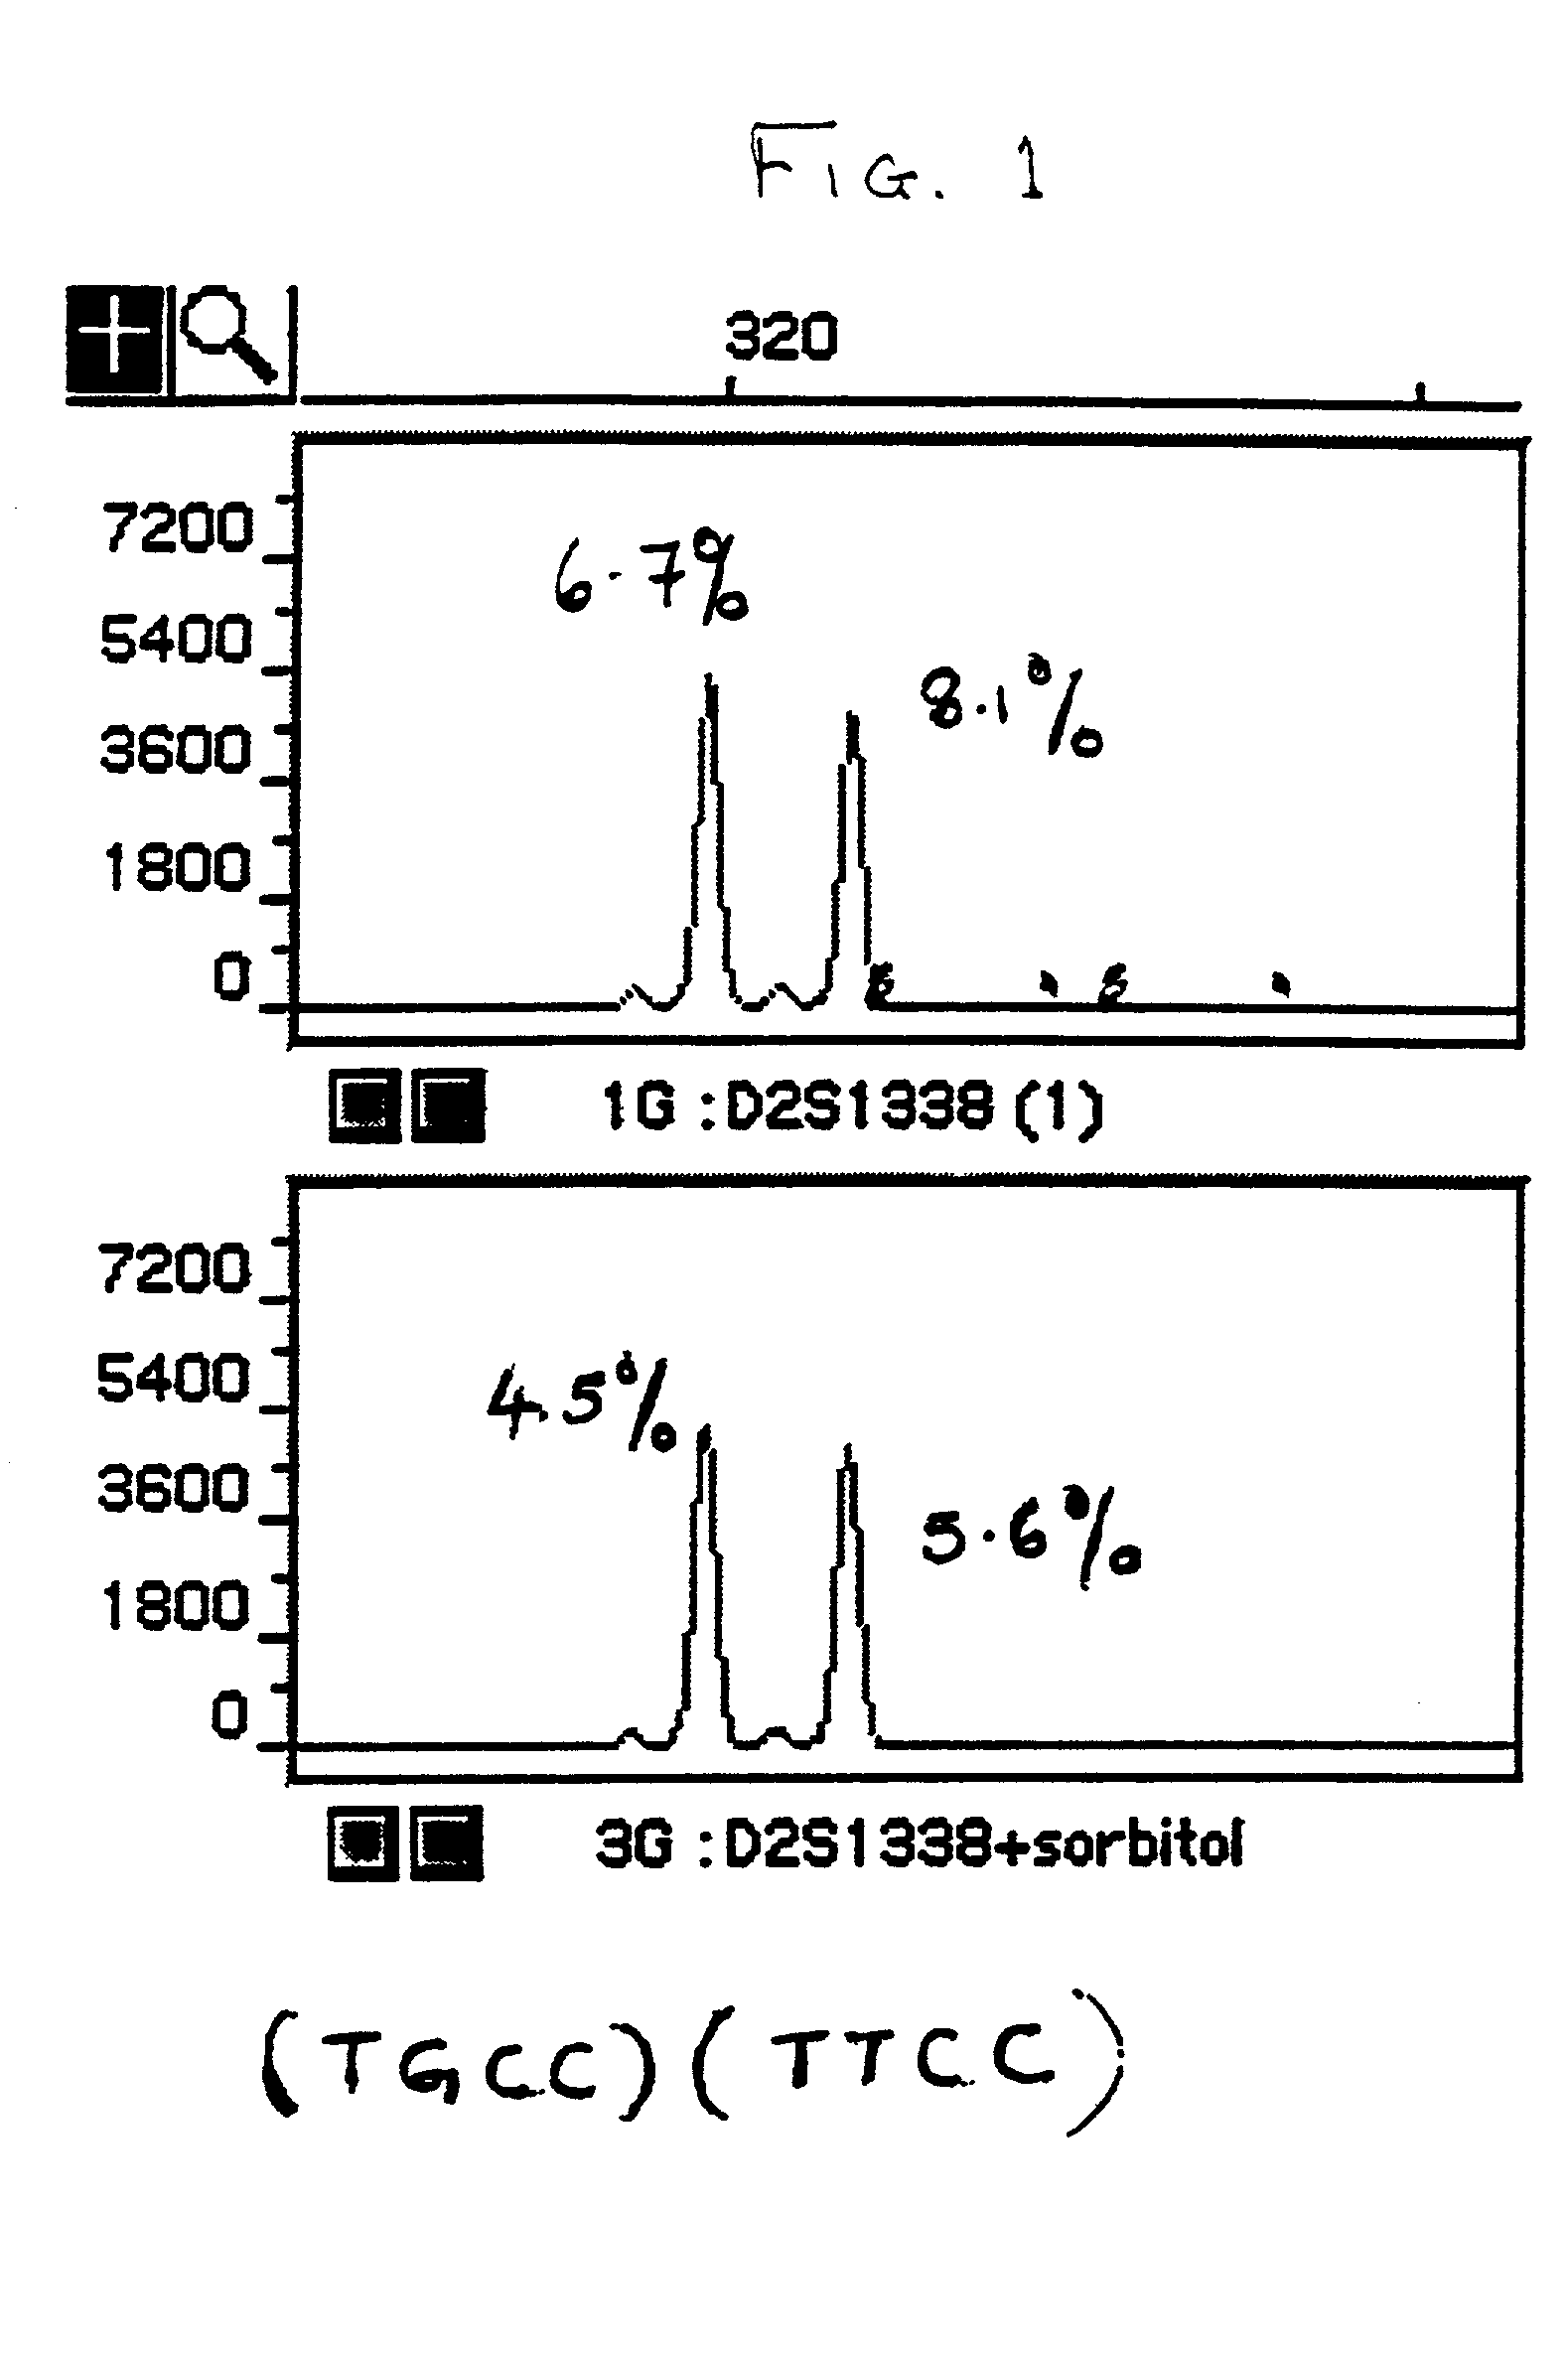 Methods for the reduction of stutter in microsatellite amplification